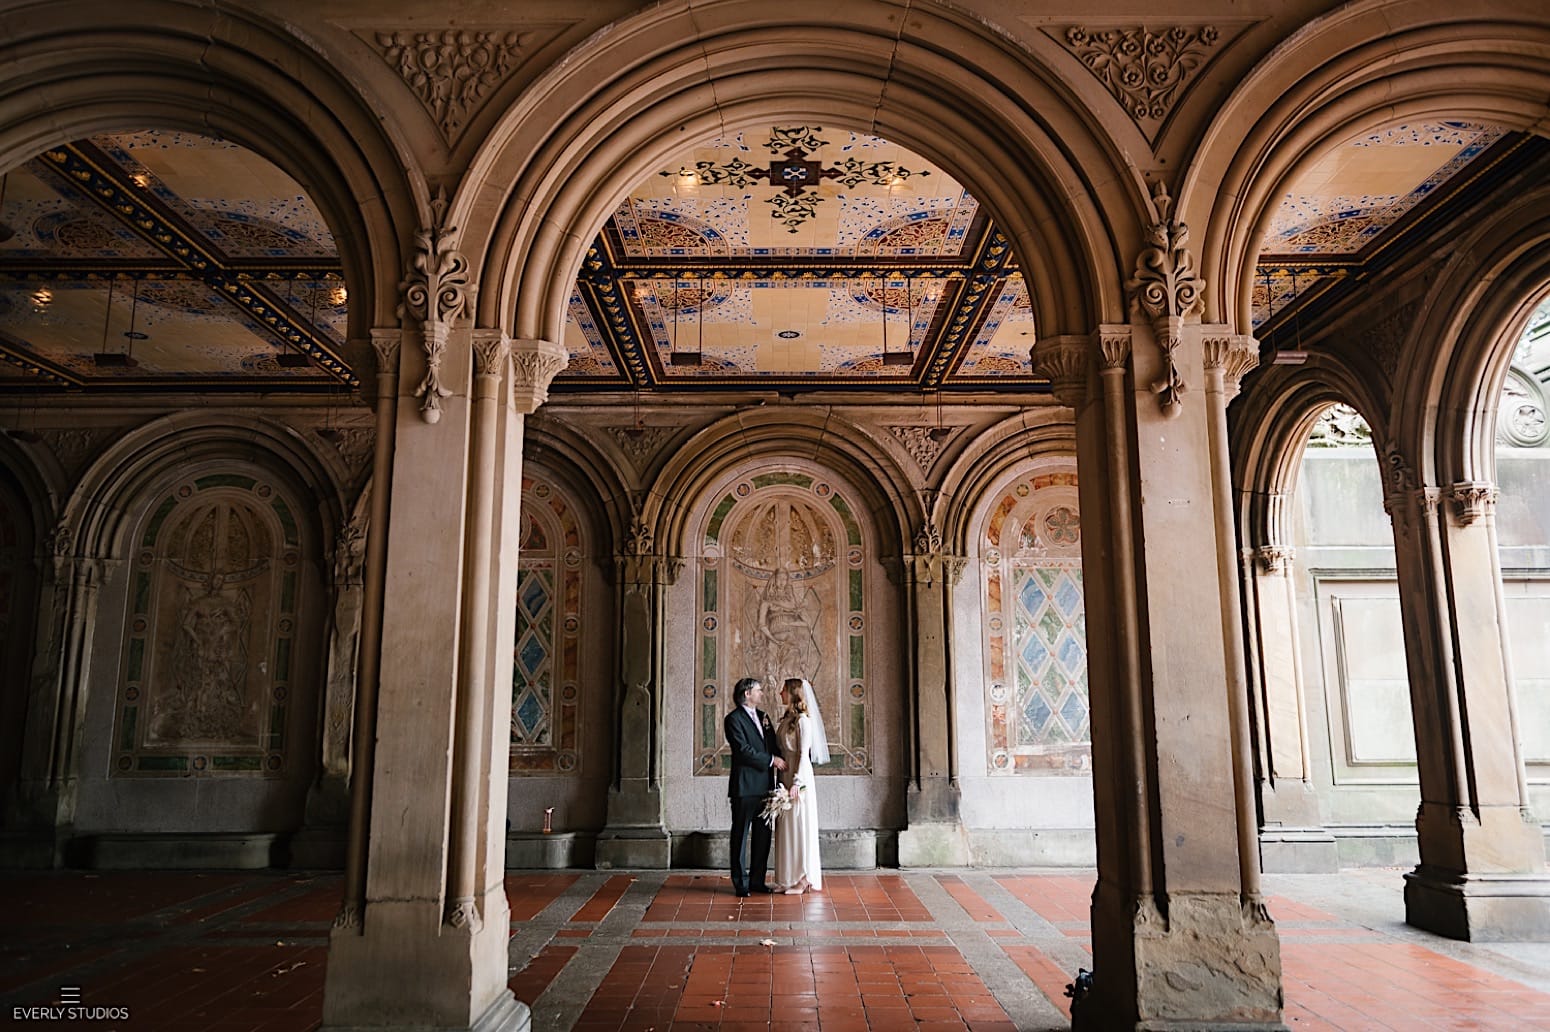 Bethesda Fountain elopement in Central Park NYC